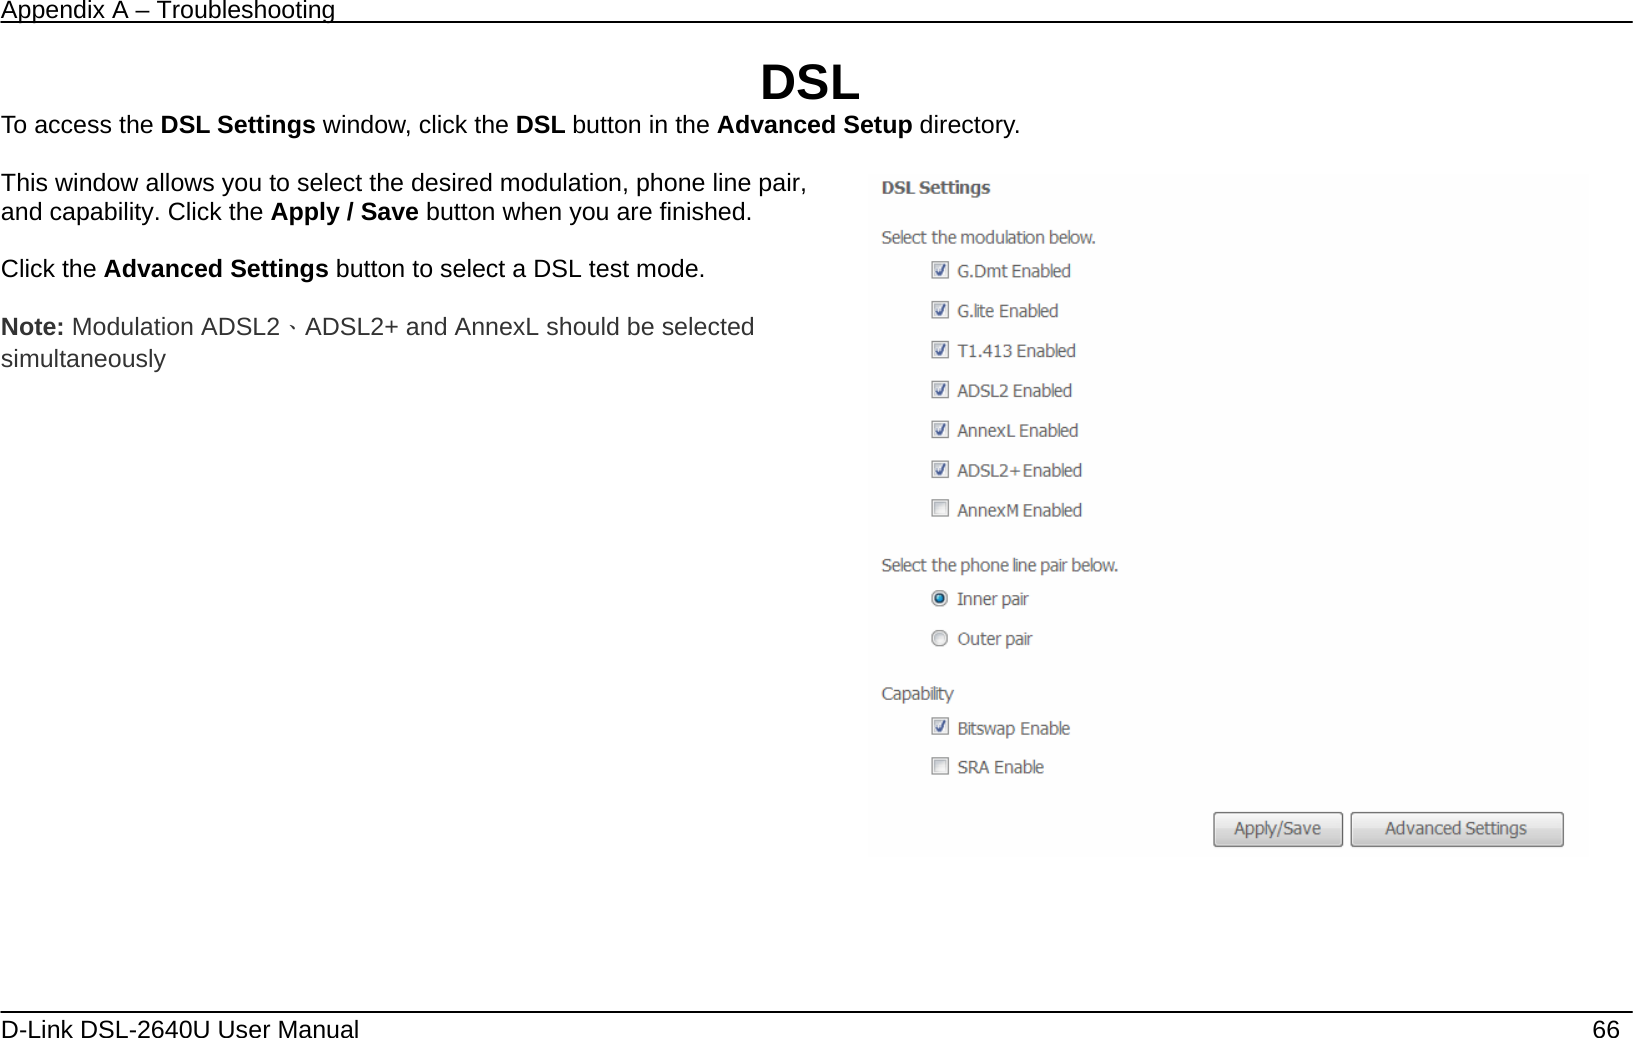 Appendix A – Troubleshooting   D-Link DSL-2640U User Manual    66 DSL To access the DSL Settings window, click the DSL button in the Advanced Setup directory.  This window allows you to select the desired modulation, phone line pair, and capability. Click the Apply / Save button when you are finished.  Click the Advanced Settings button to select a DSL test mode.  Note: Modulation ADSL2、ADSL2+ and AnnexL should be selected simultaneously      